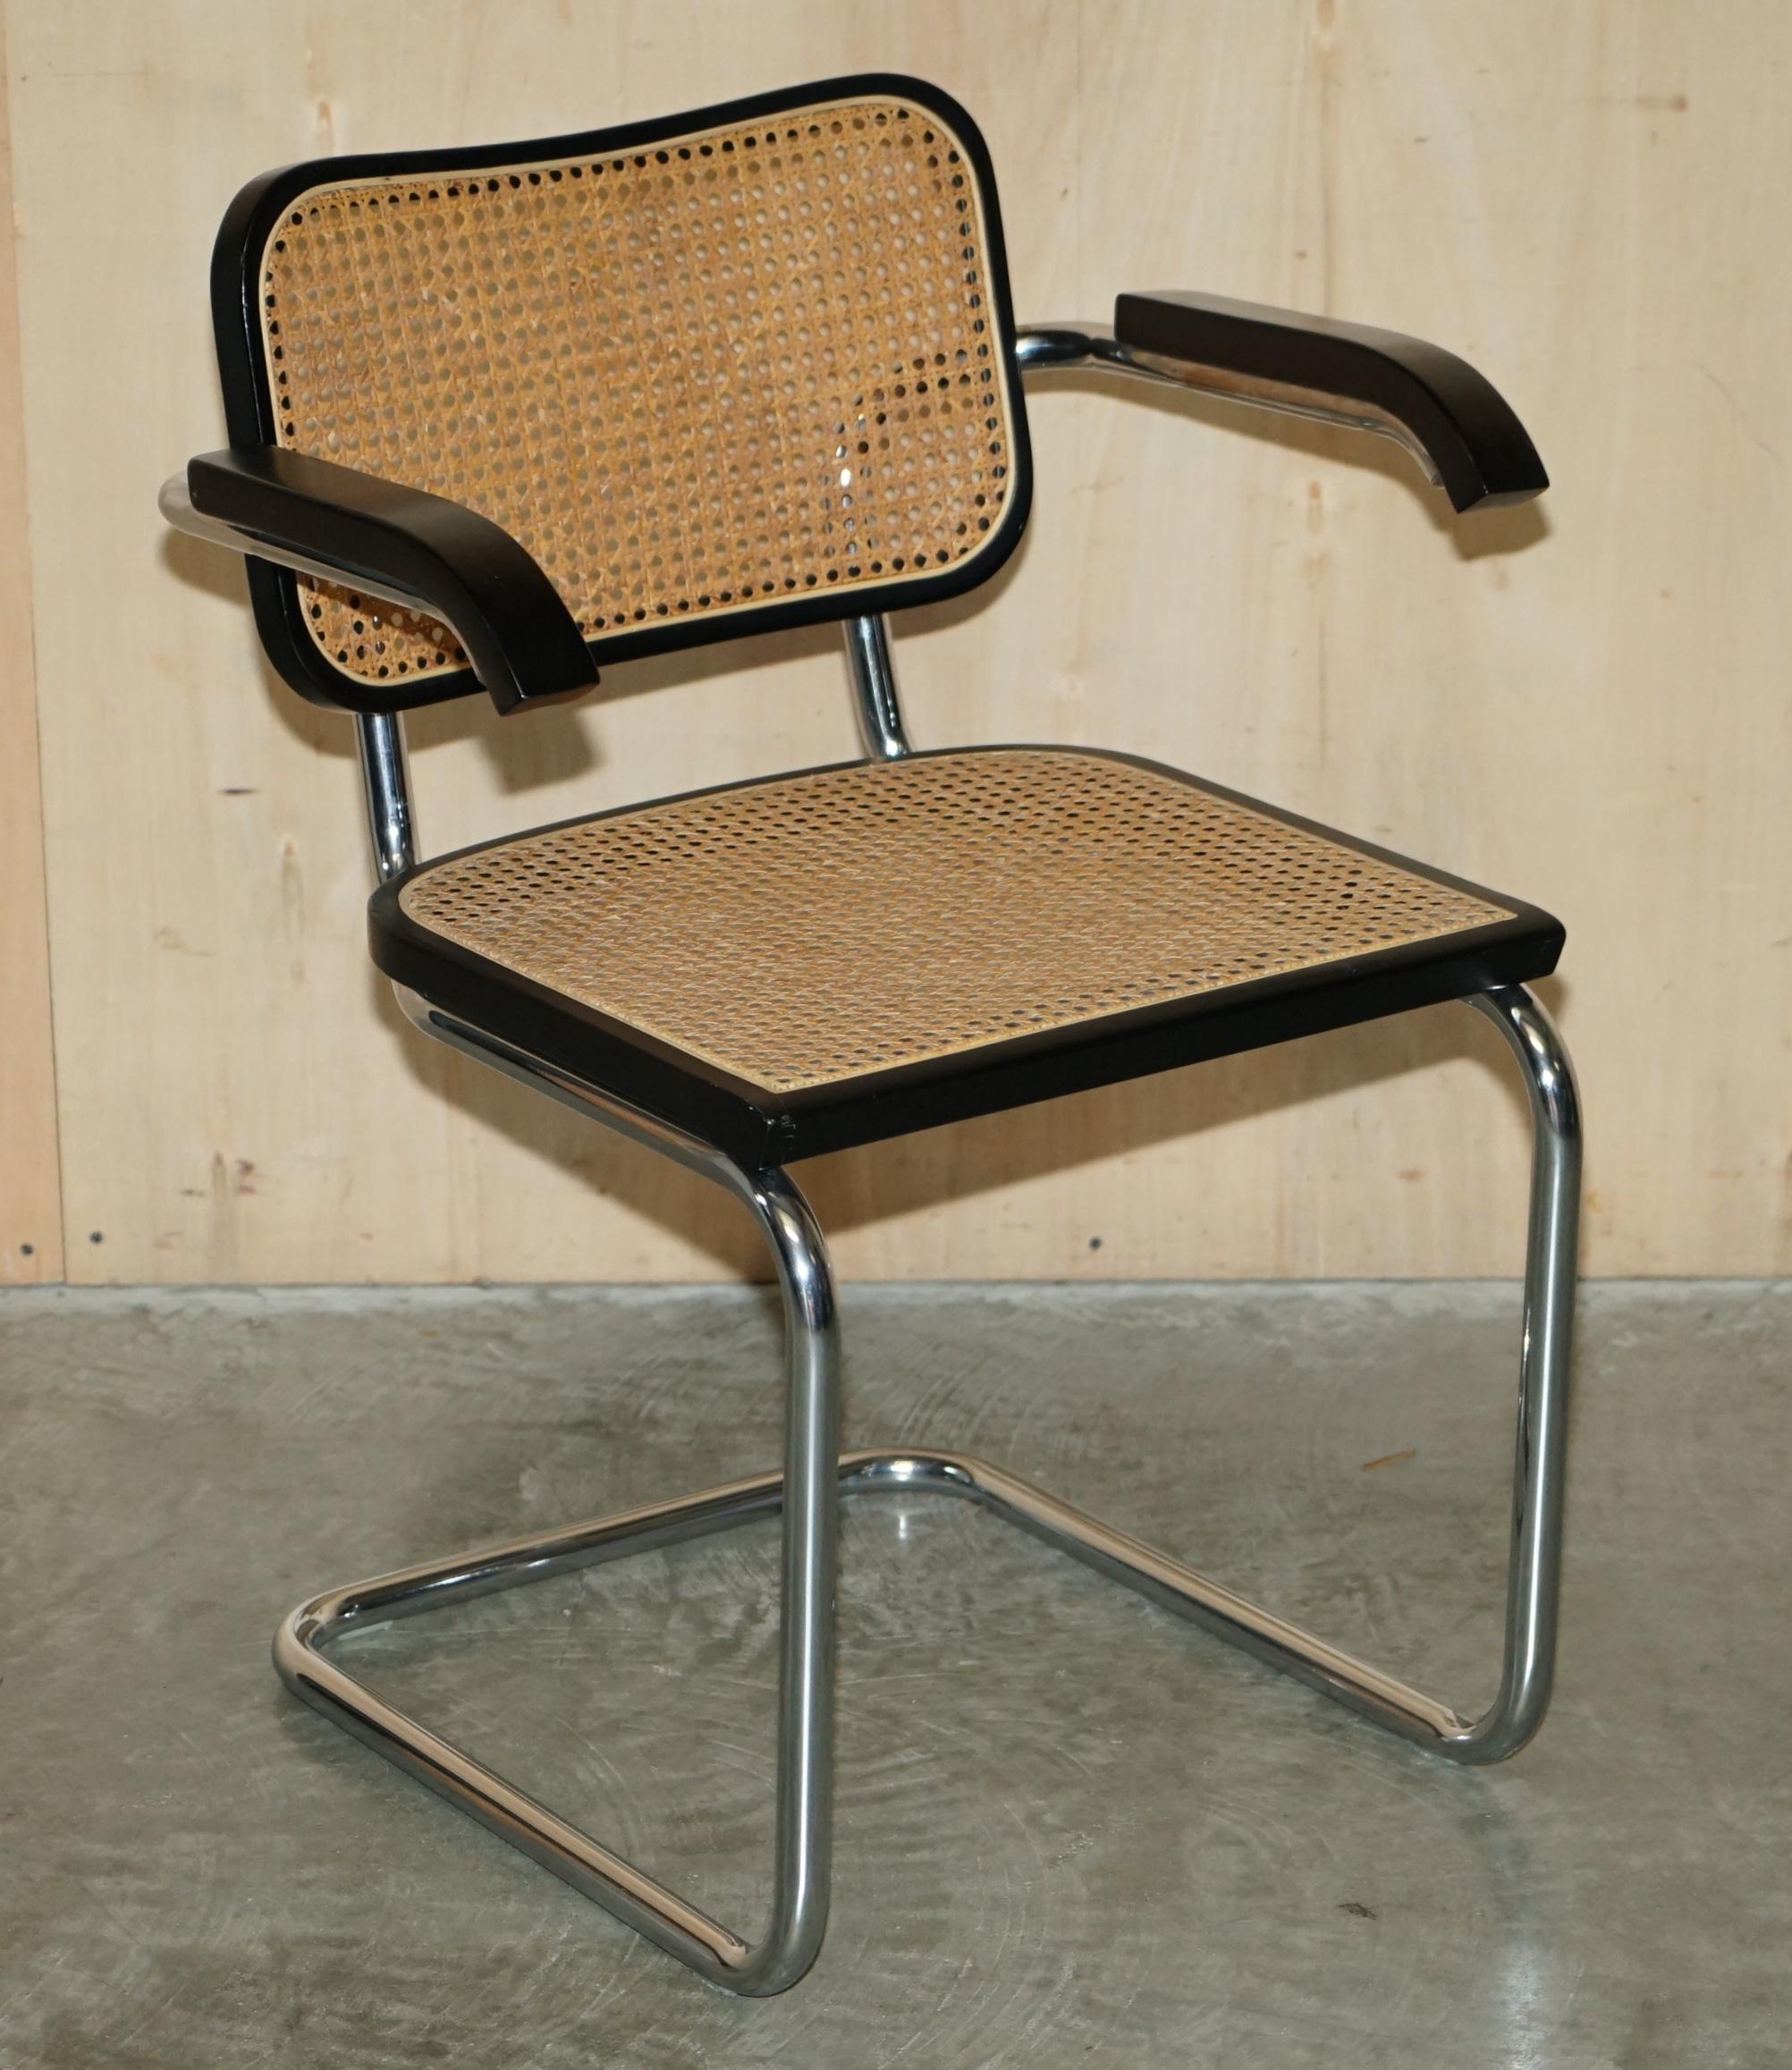 We are delighted to offer for sale this suite of four, Mid Century Modern circa 1970's, made in Italy stamped, Marcel Breuer, Cesca armchairs with chrome frames and bergere upholstery 

These truly are a very rare suite, its hard to find four of